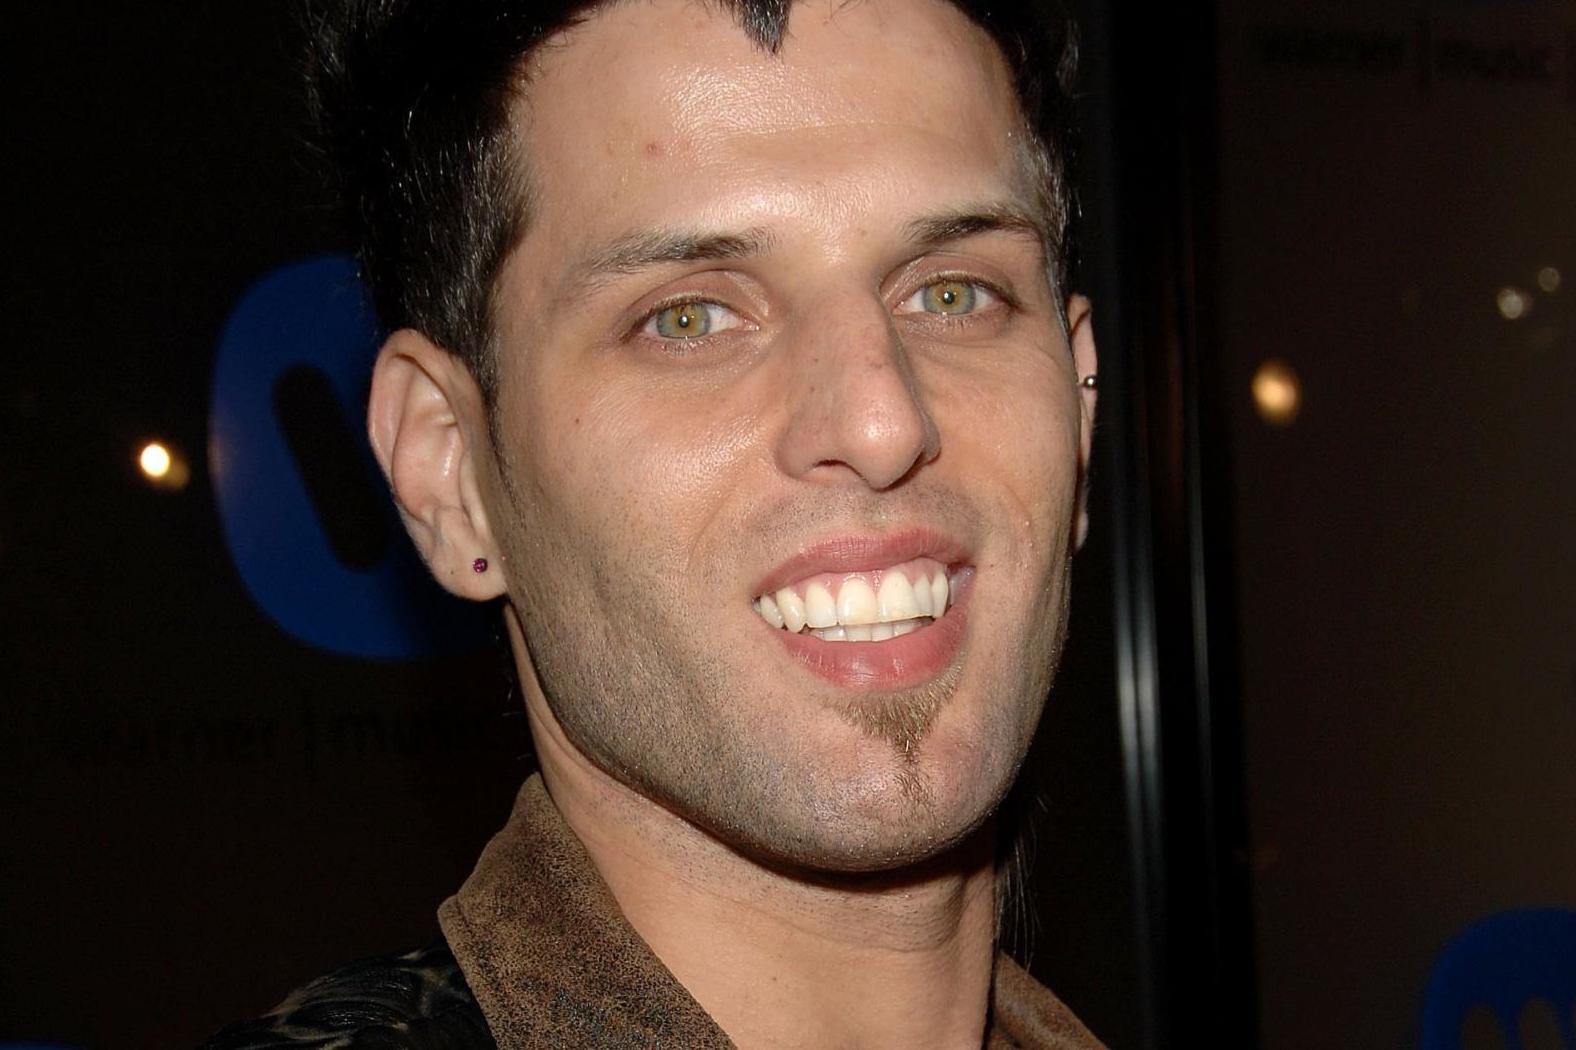 Devin Lima arrives at the Warner Music Group 2006 Grammy After Party held at the Pacific Design Center on 8 February, 2006 in Los Angeles, California.